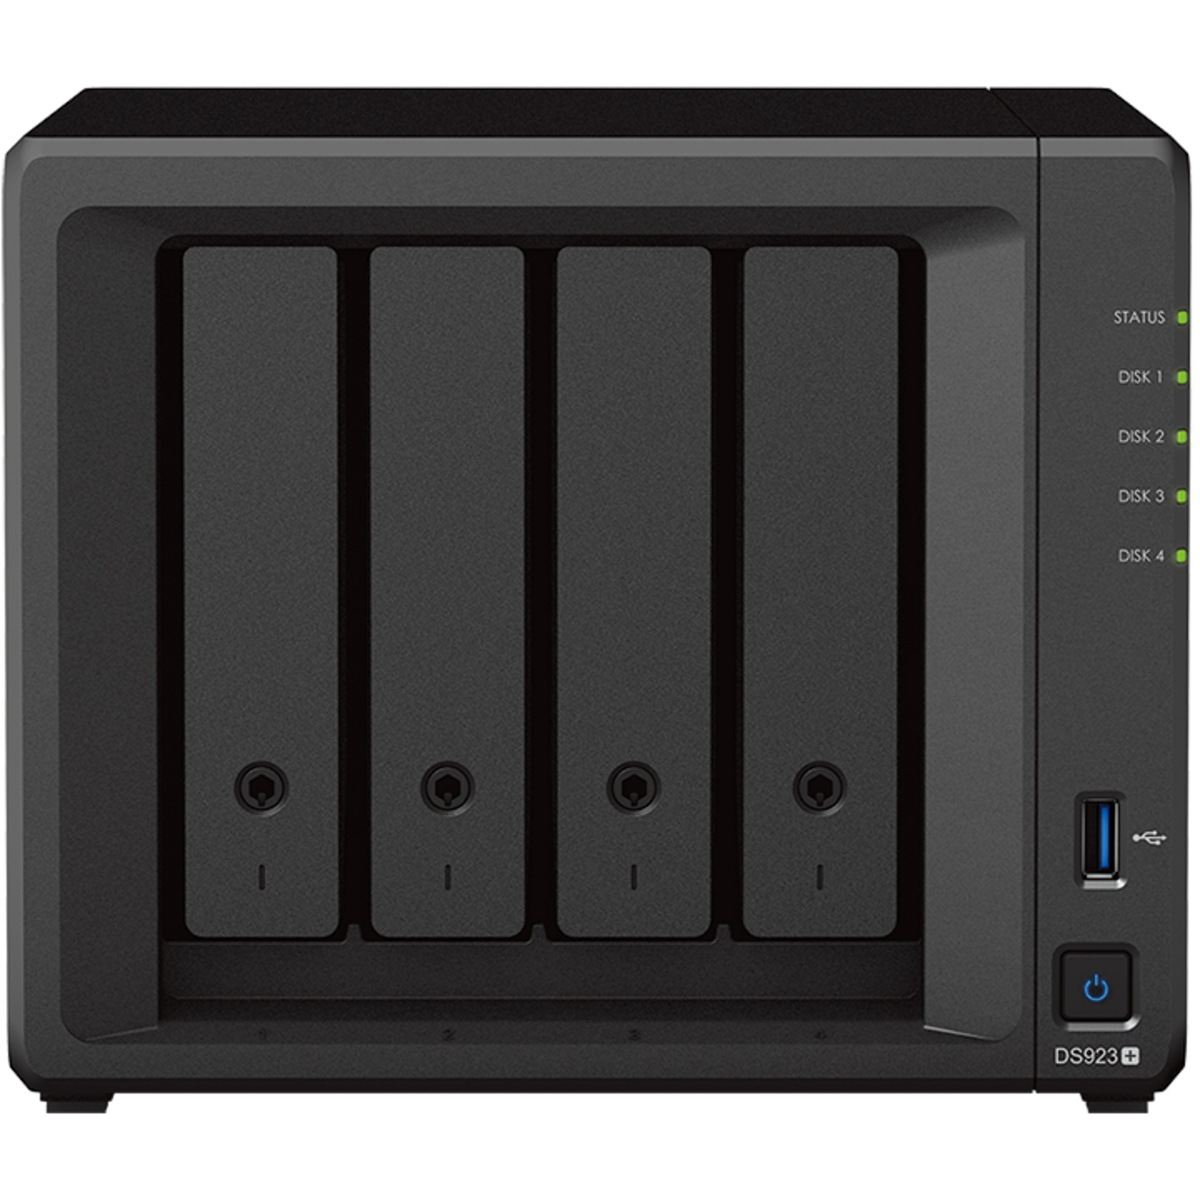 Synology DiskStation DS923+ 8tb 4-Bay Desktop Multimedia / Power User / Business NAS - Network Attached Storage Device 4x2tb Sandisk Ultra 3D SDSSDH3-2T00 2.5 560/520MB/s SATA 6Gb/s SSD CONSUMER Class Drives Installed - Burn-In Tested - ON SALE - FREE RAM UPGRADE DiskStation DS923+